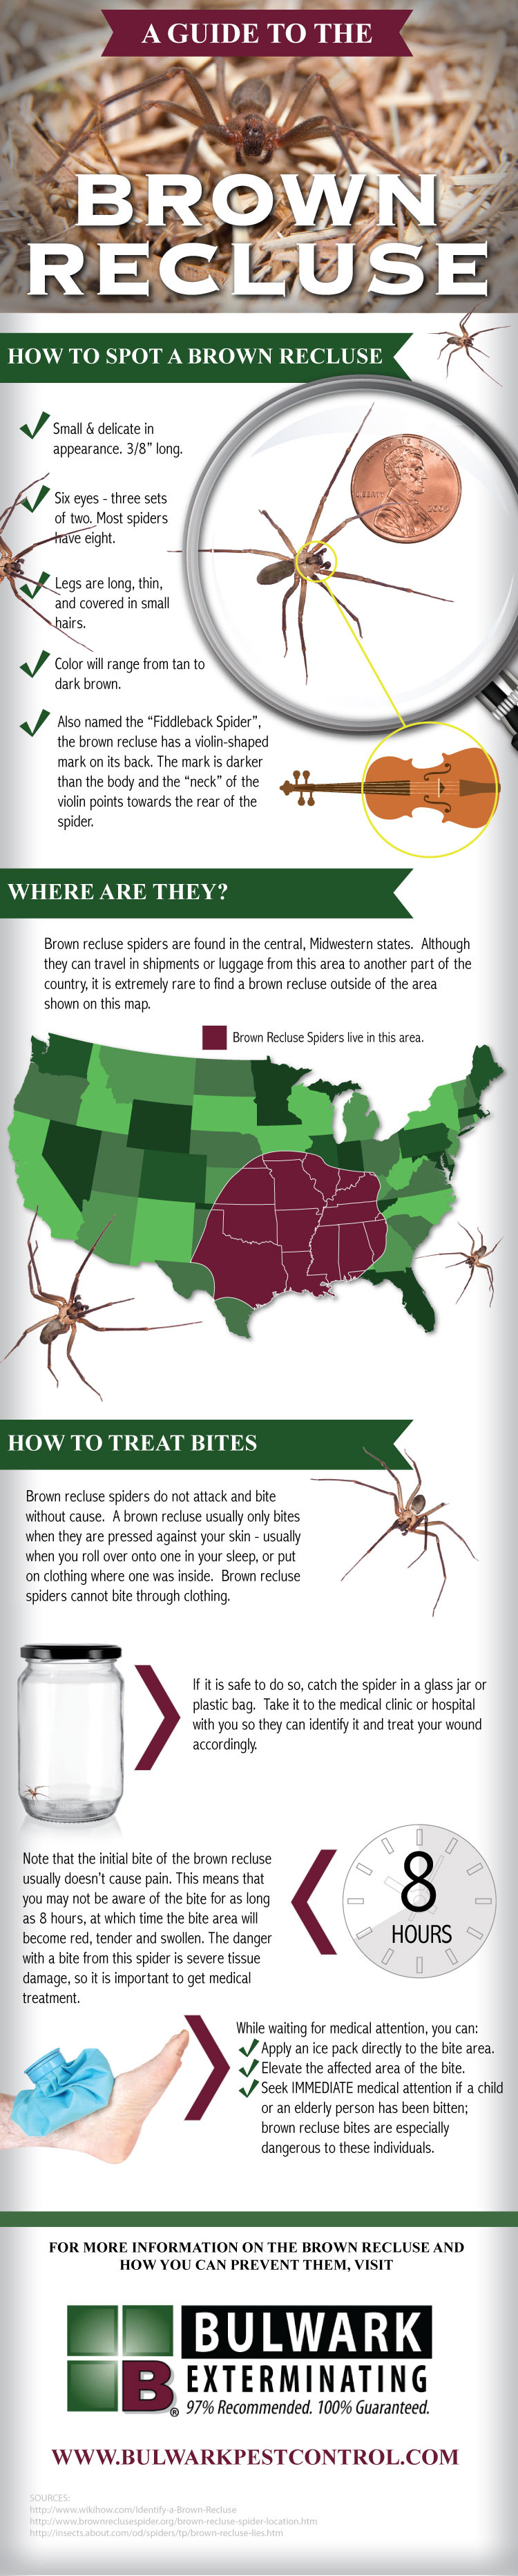 A Guide to the Brown Recluse Spider